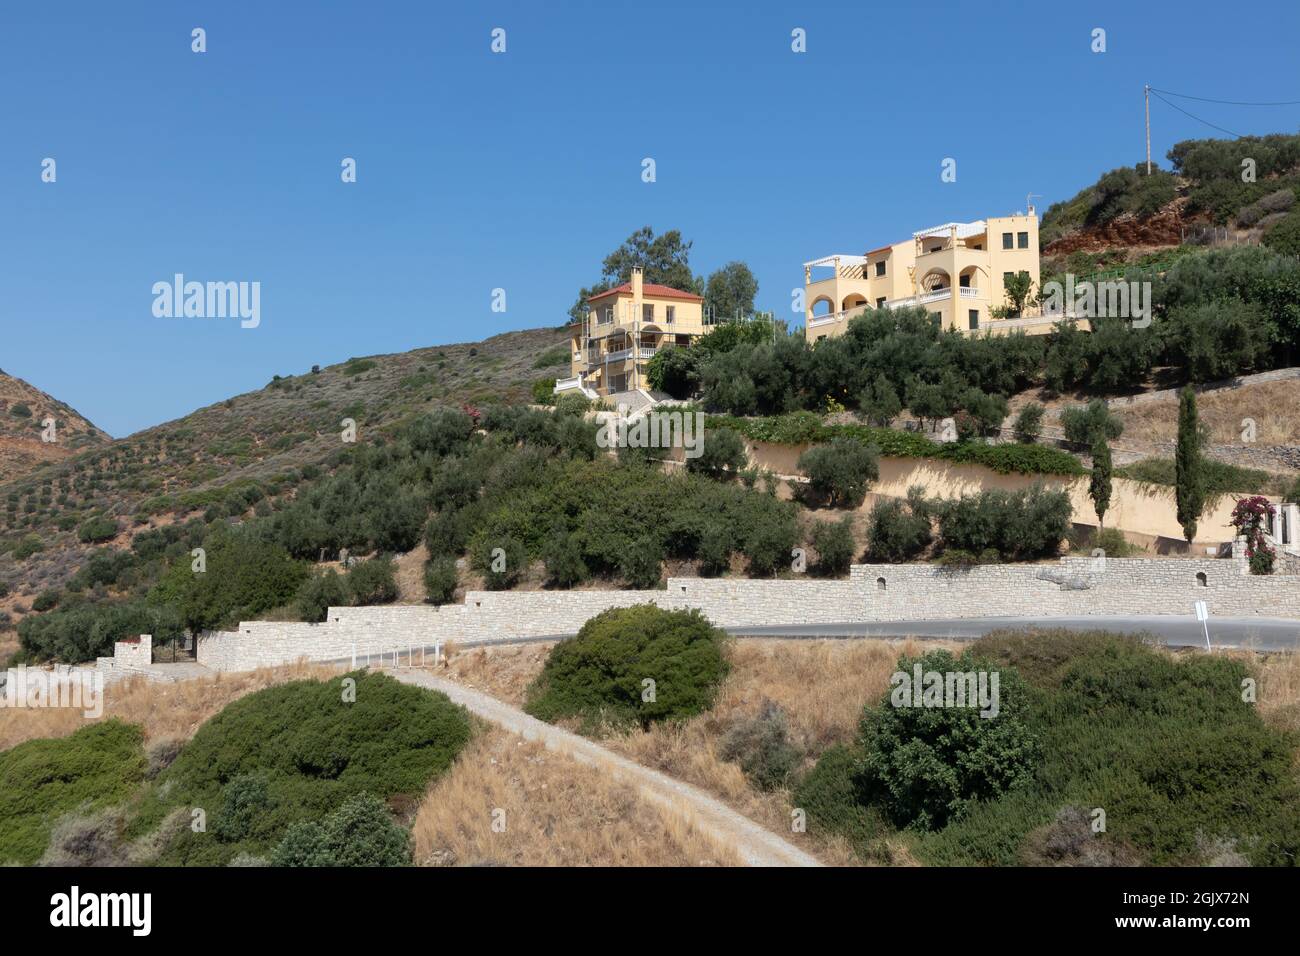 A resort town on the mountains in Crete, Greece Stock Photo